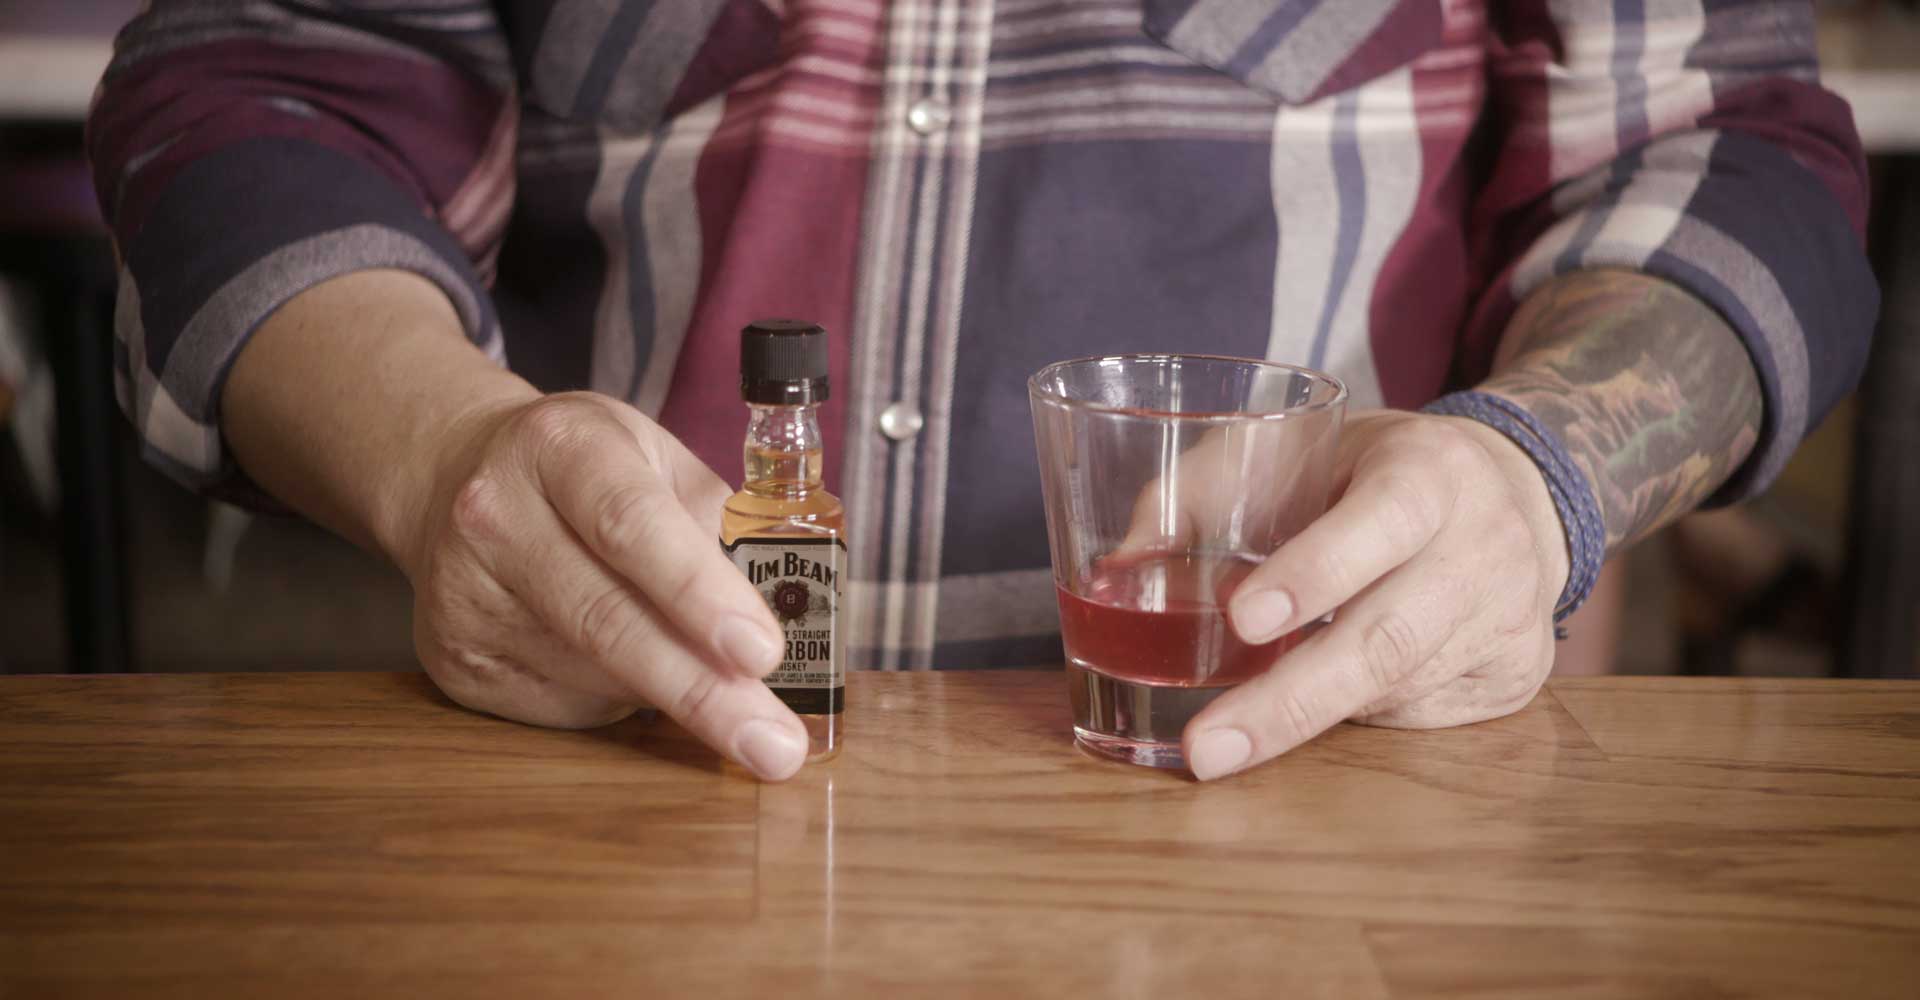 #Snappchat with Mat Snapp, Airplane Pickleback